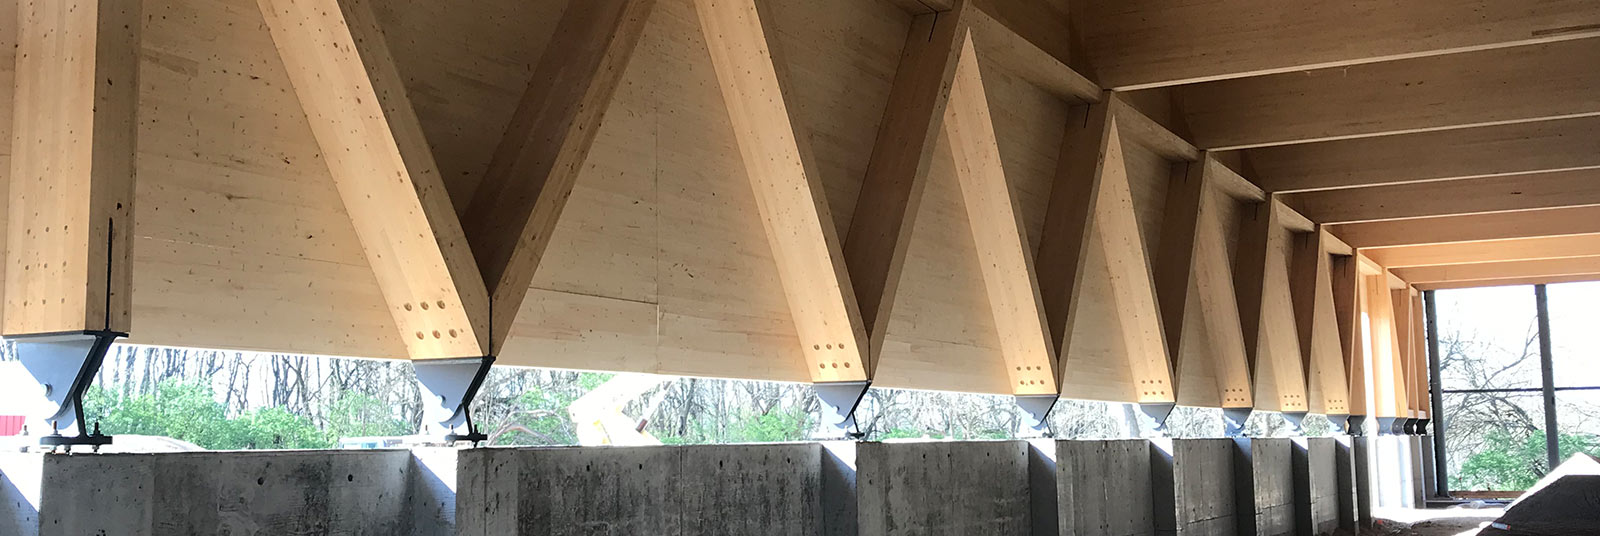 Close-up of the CLT and glulam structure at the Salvagnini addition in Hamilton, Ohio.